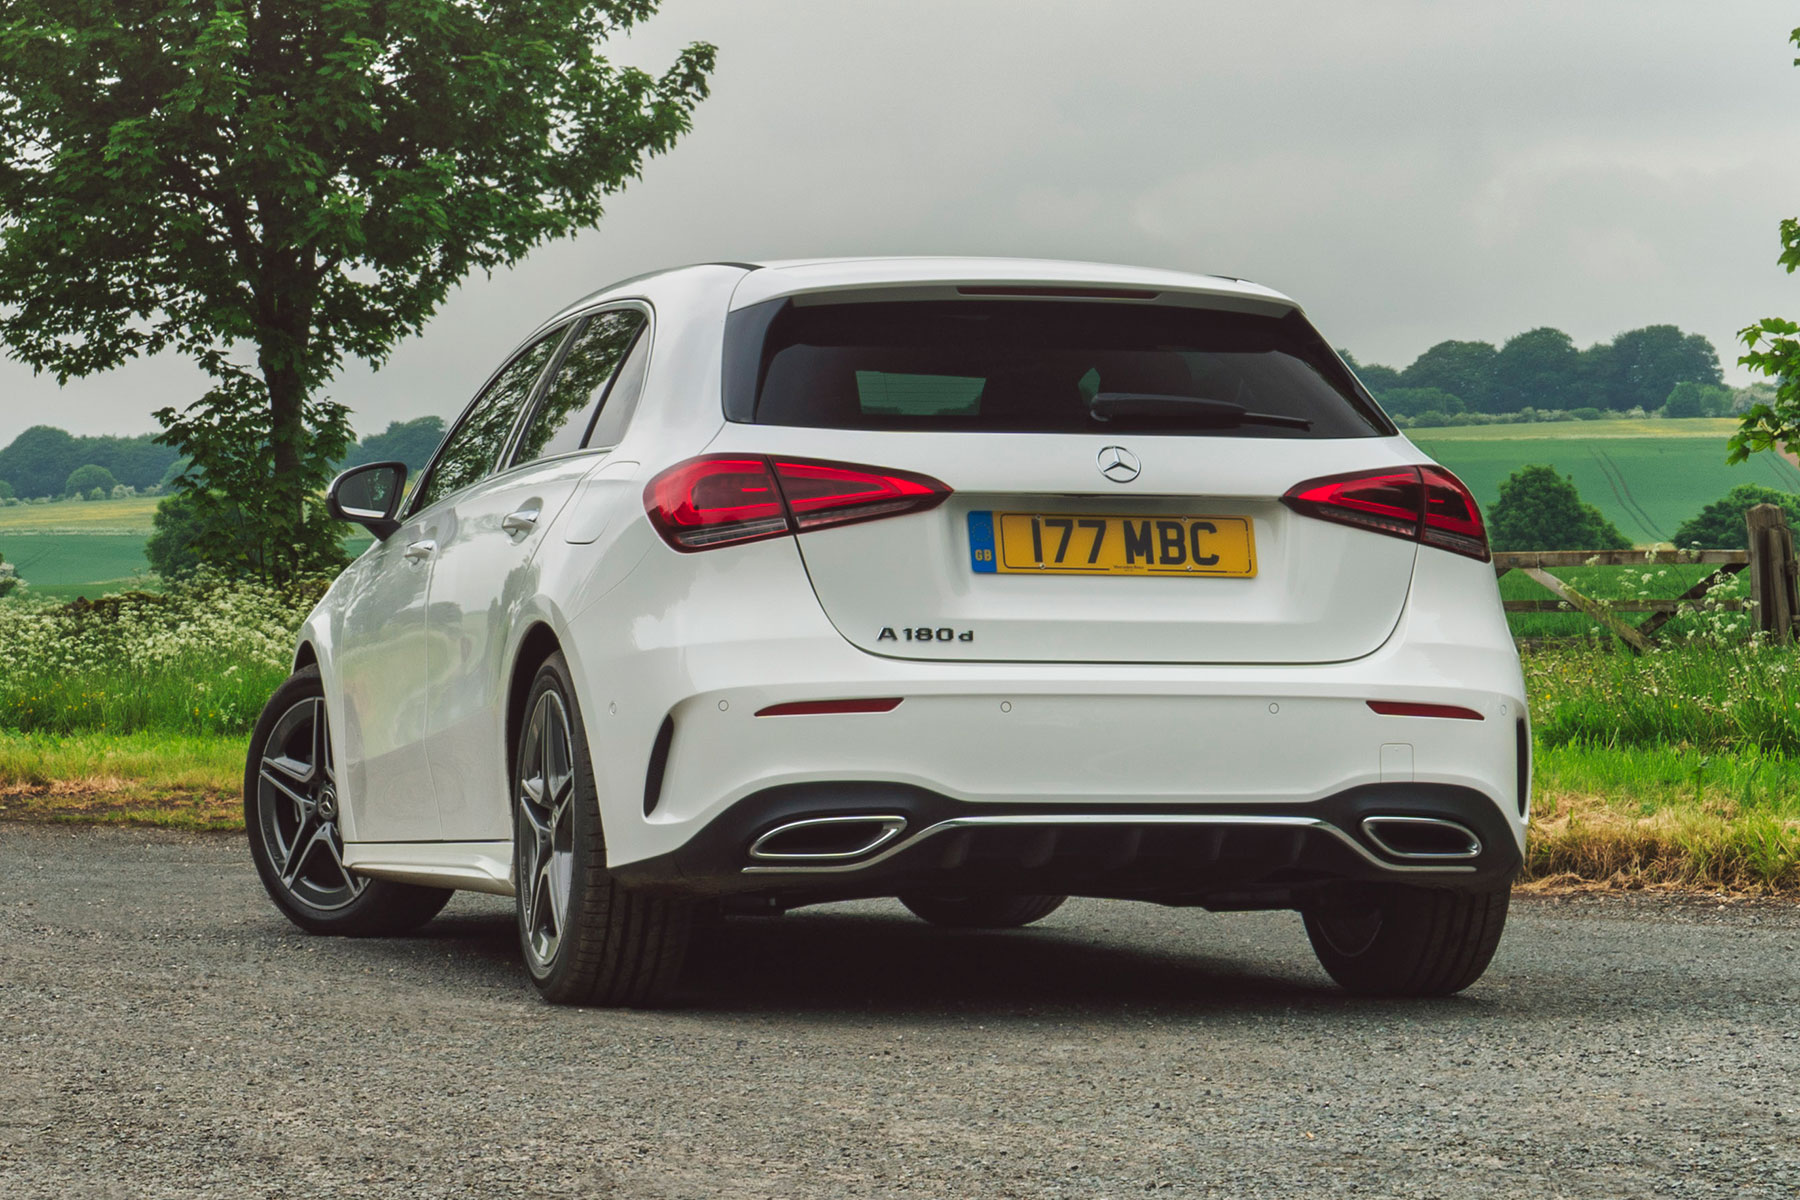 2018 Mercedes-Benz A-Class first drive review: wowed by tech | Motoring Research